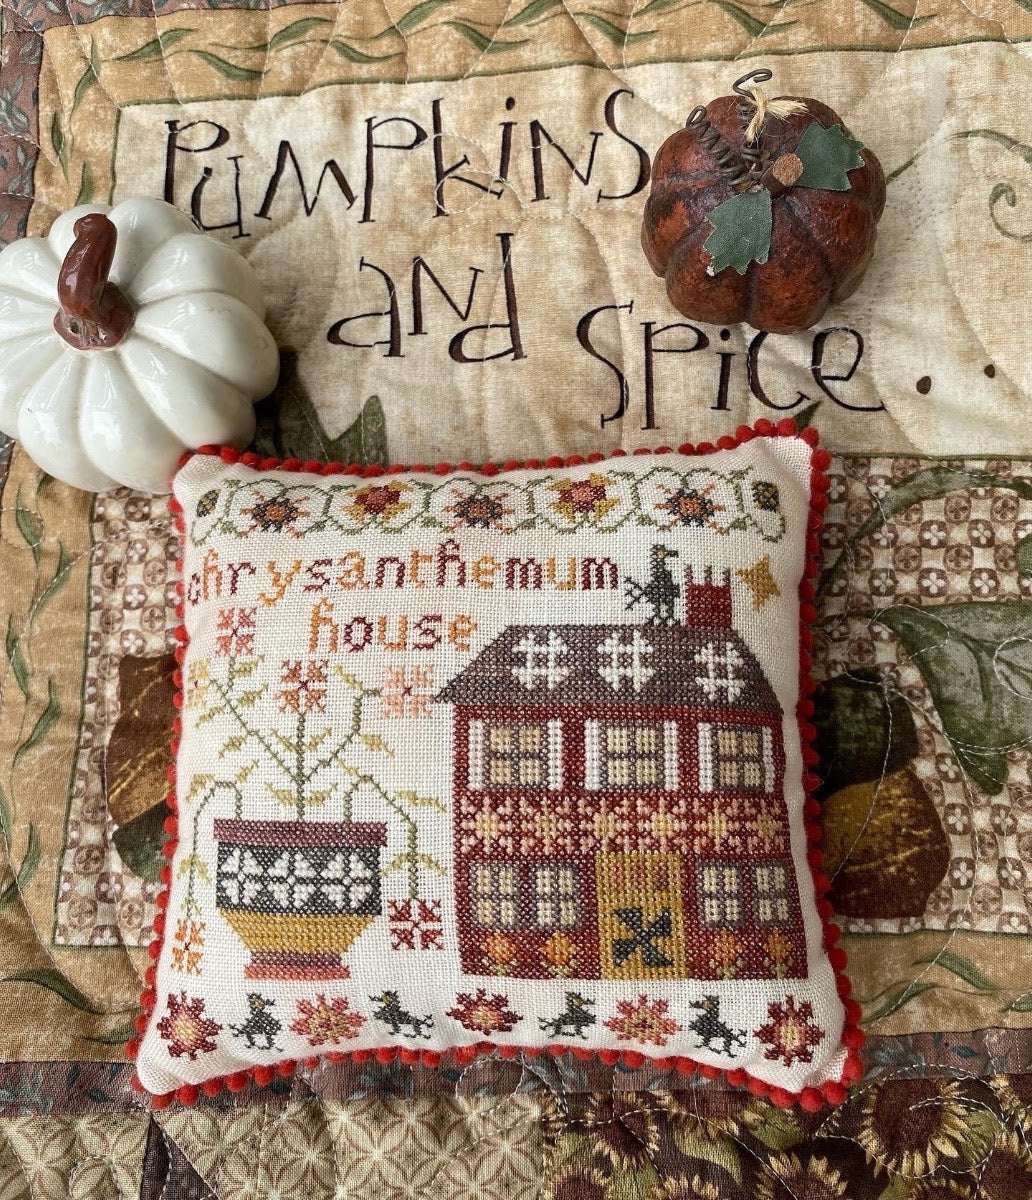 Chrysanthemum House - The Houses on Pumpkin Lane #2 - Pansy Patch Quilts and Stitchery, Needlecraft Patterns, The Crafty Grimalkin - A Cross Stitch Store